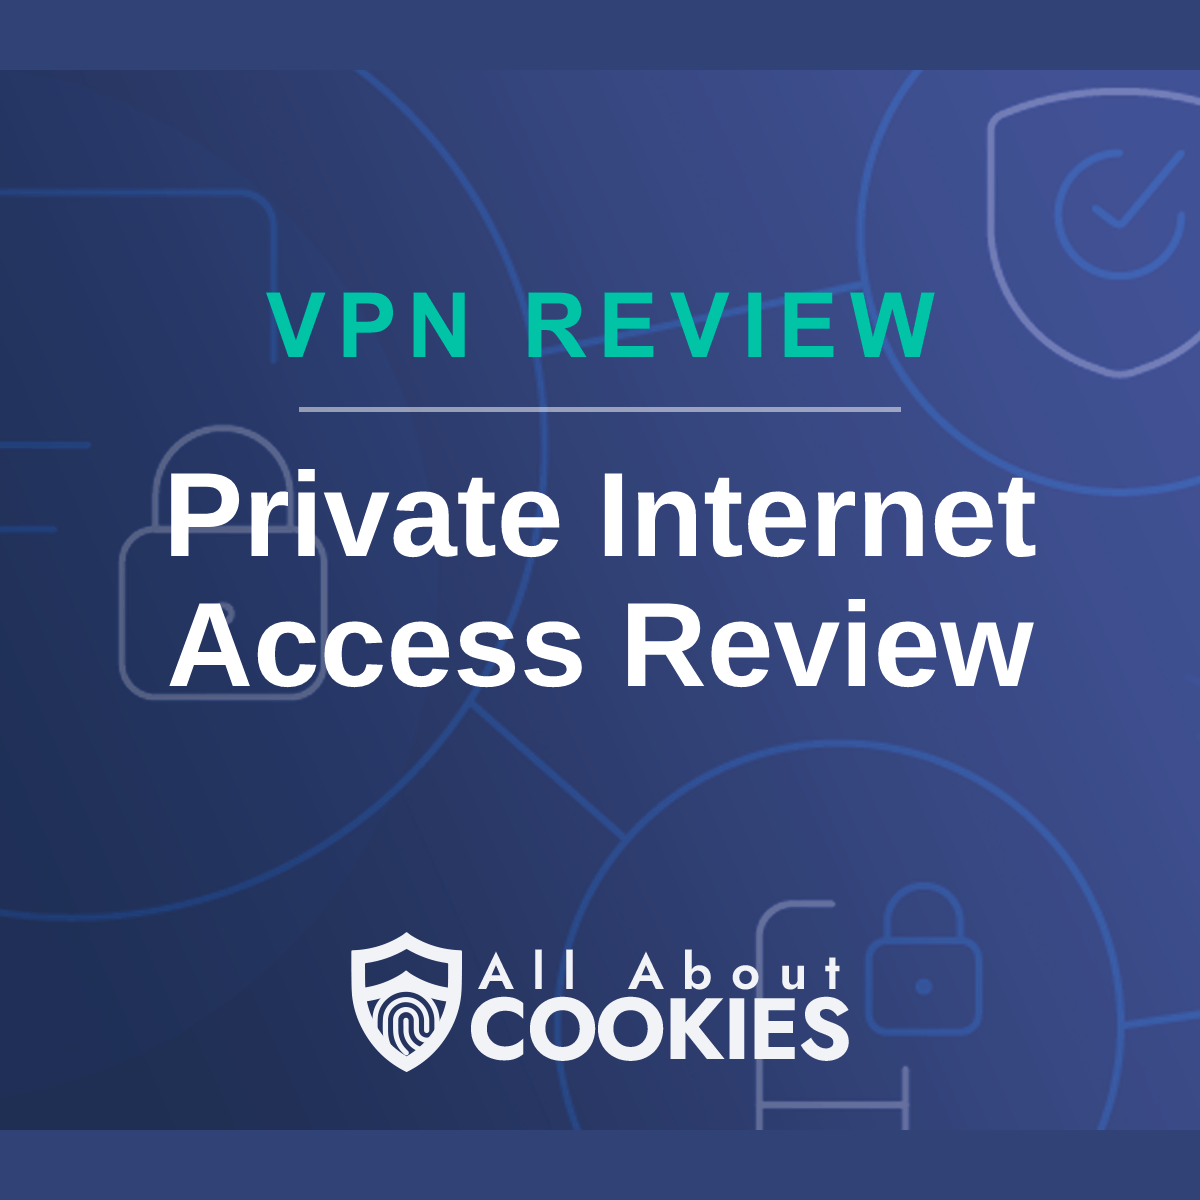 A blue background with images of locks and shields with the text &quot;Private Internet Access Review&quot; and the All About Cookies logo. 